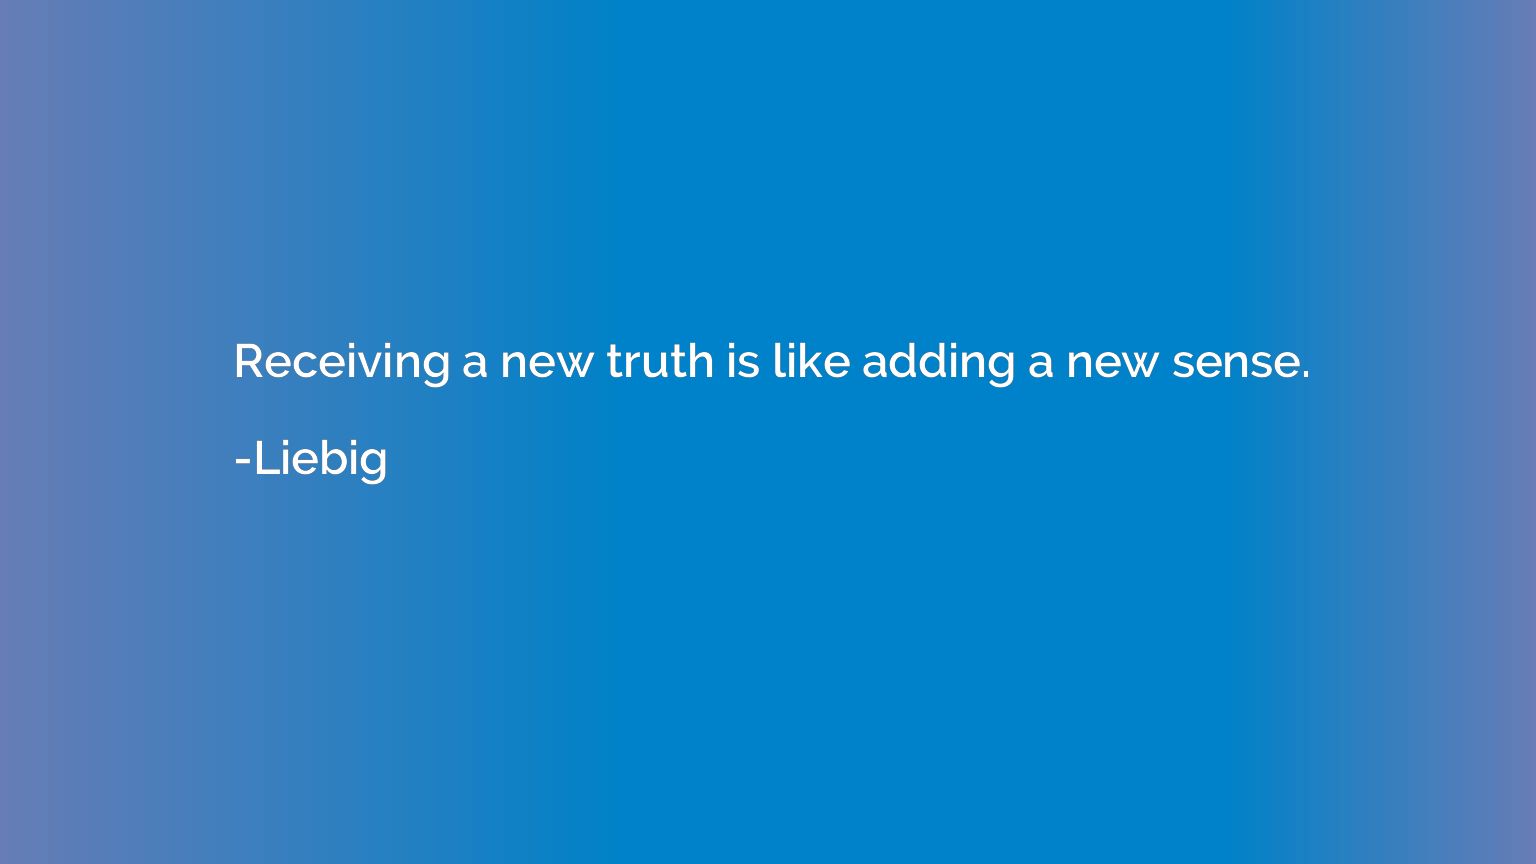 Receiving a new truth is like adding a new sense.